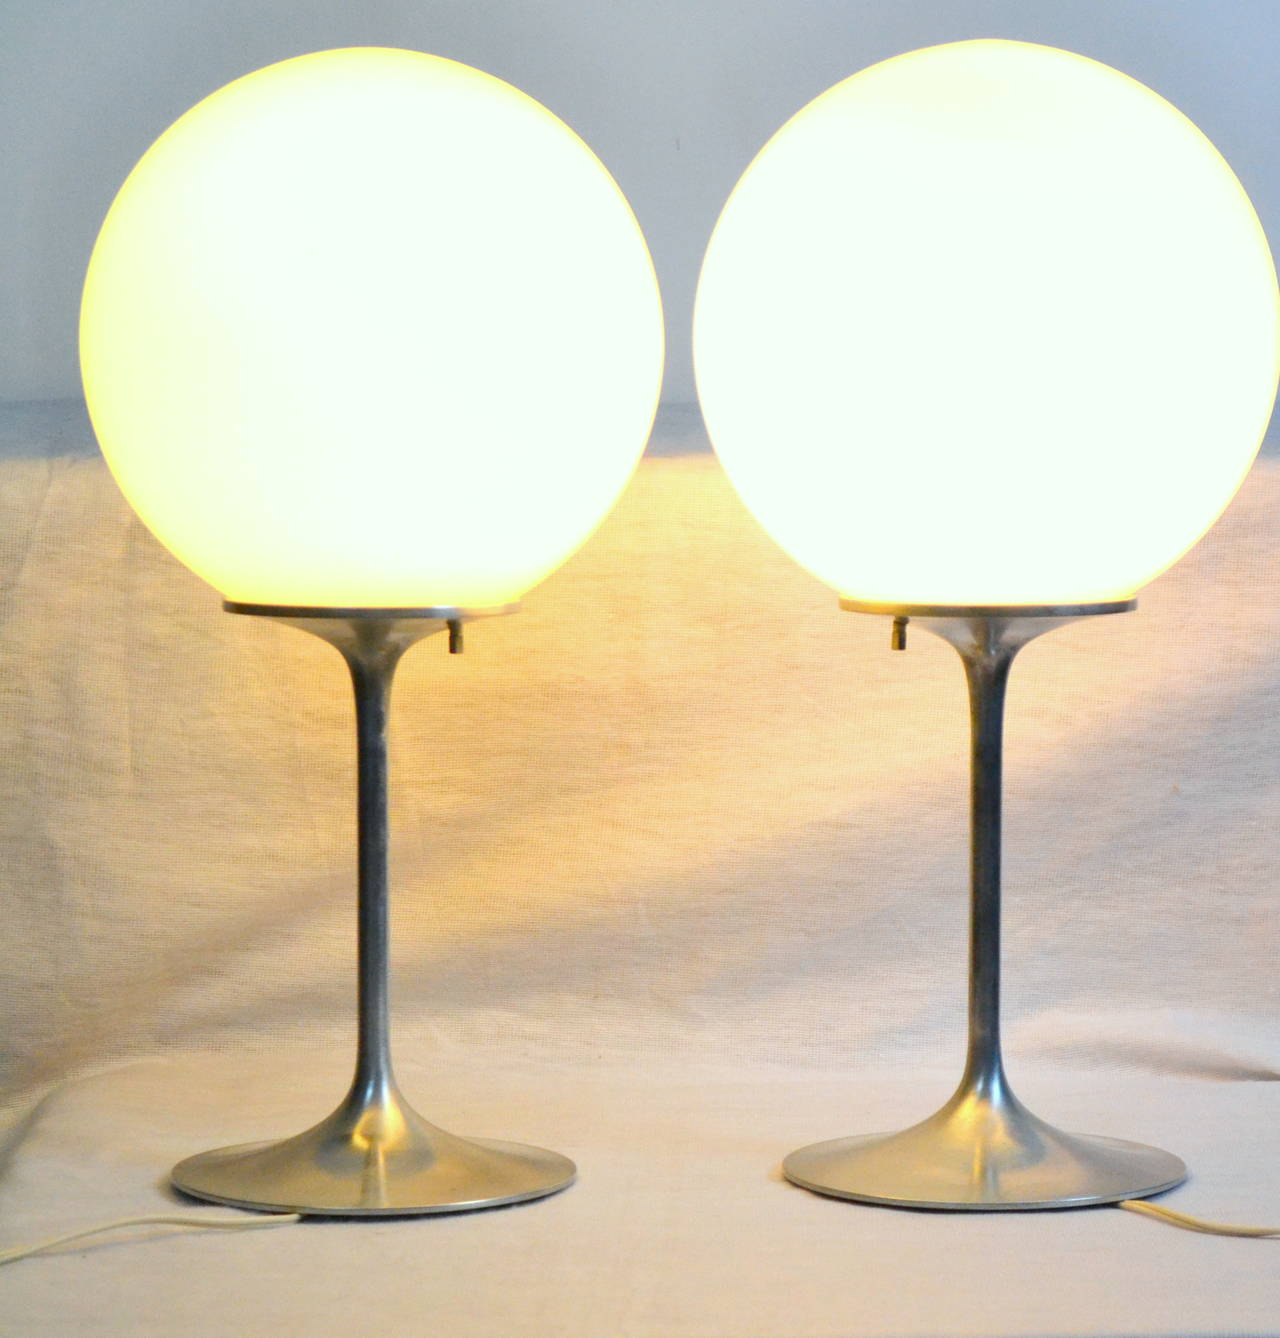 Tall pair of brushed aluminum table lamps designed by Bill Curry in the 1960s for Design Line of California.
The lamps are in excellent vintage condition and have been professionally rewired.